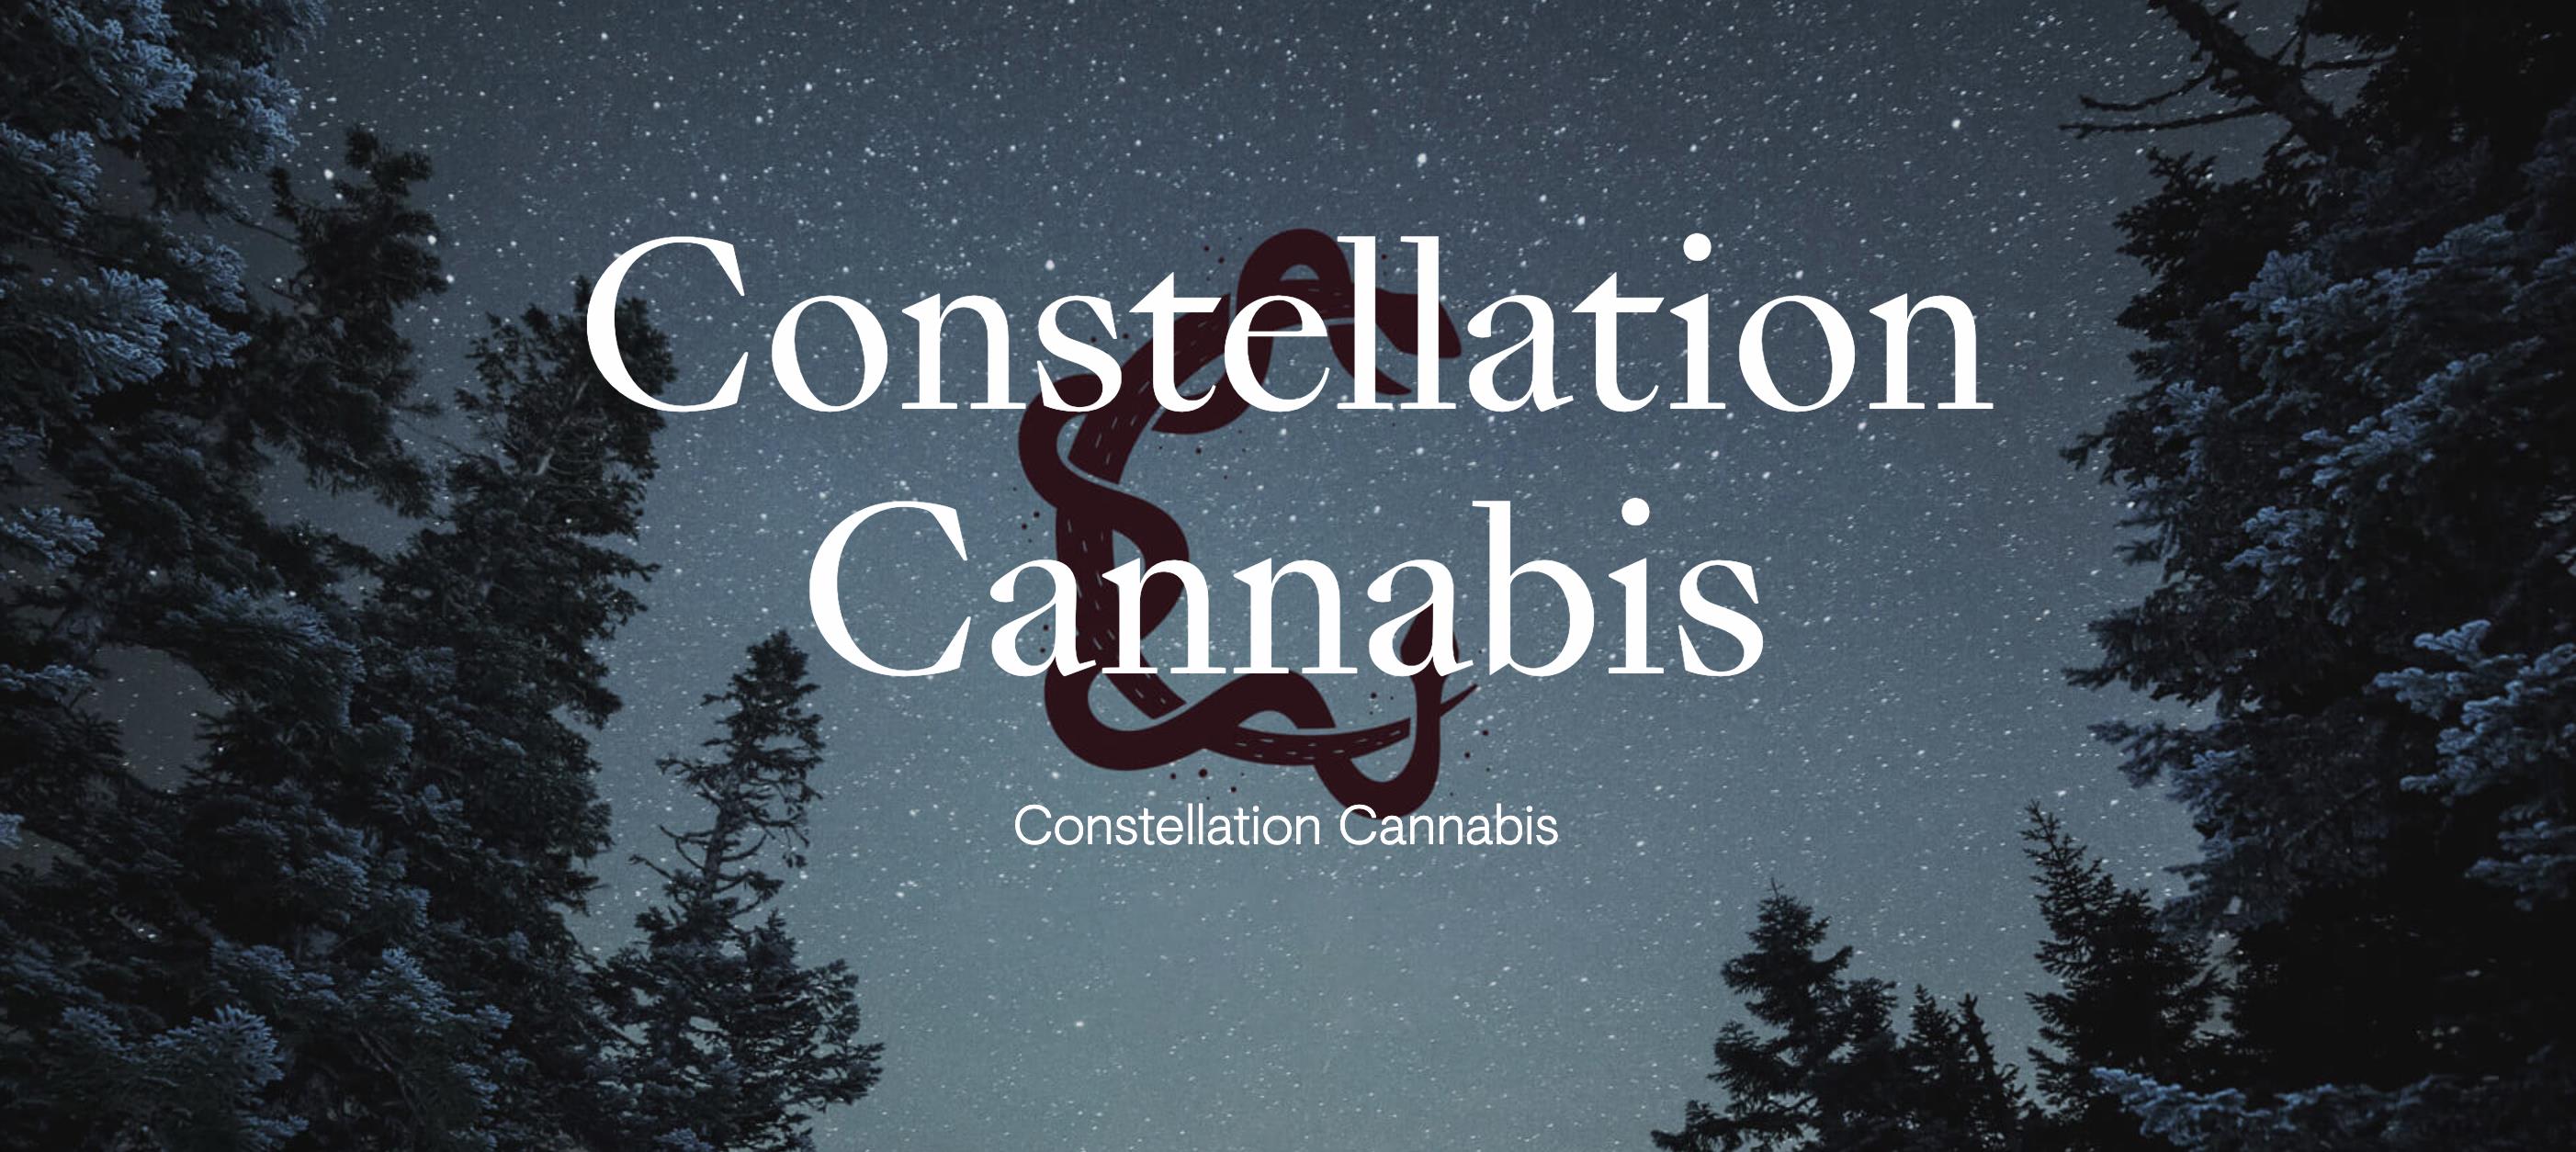 Constellation Cannabis - Brand and Campaign